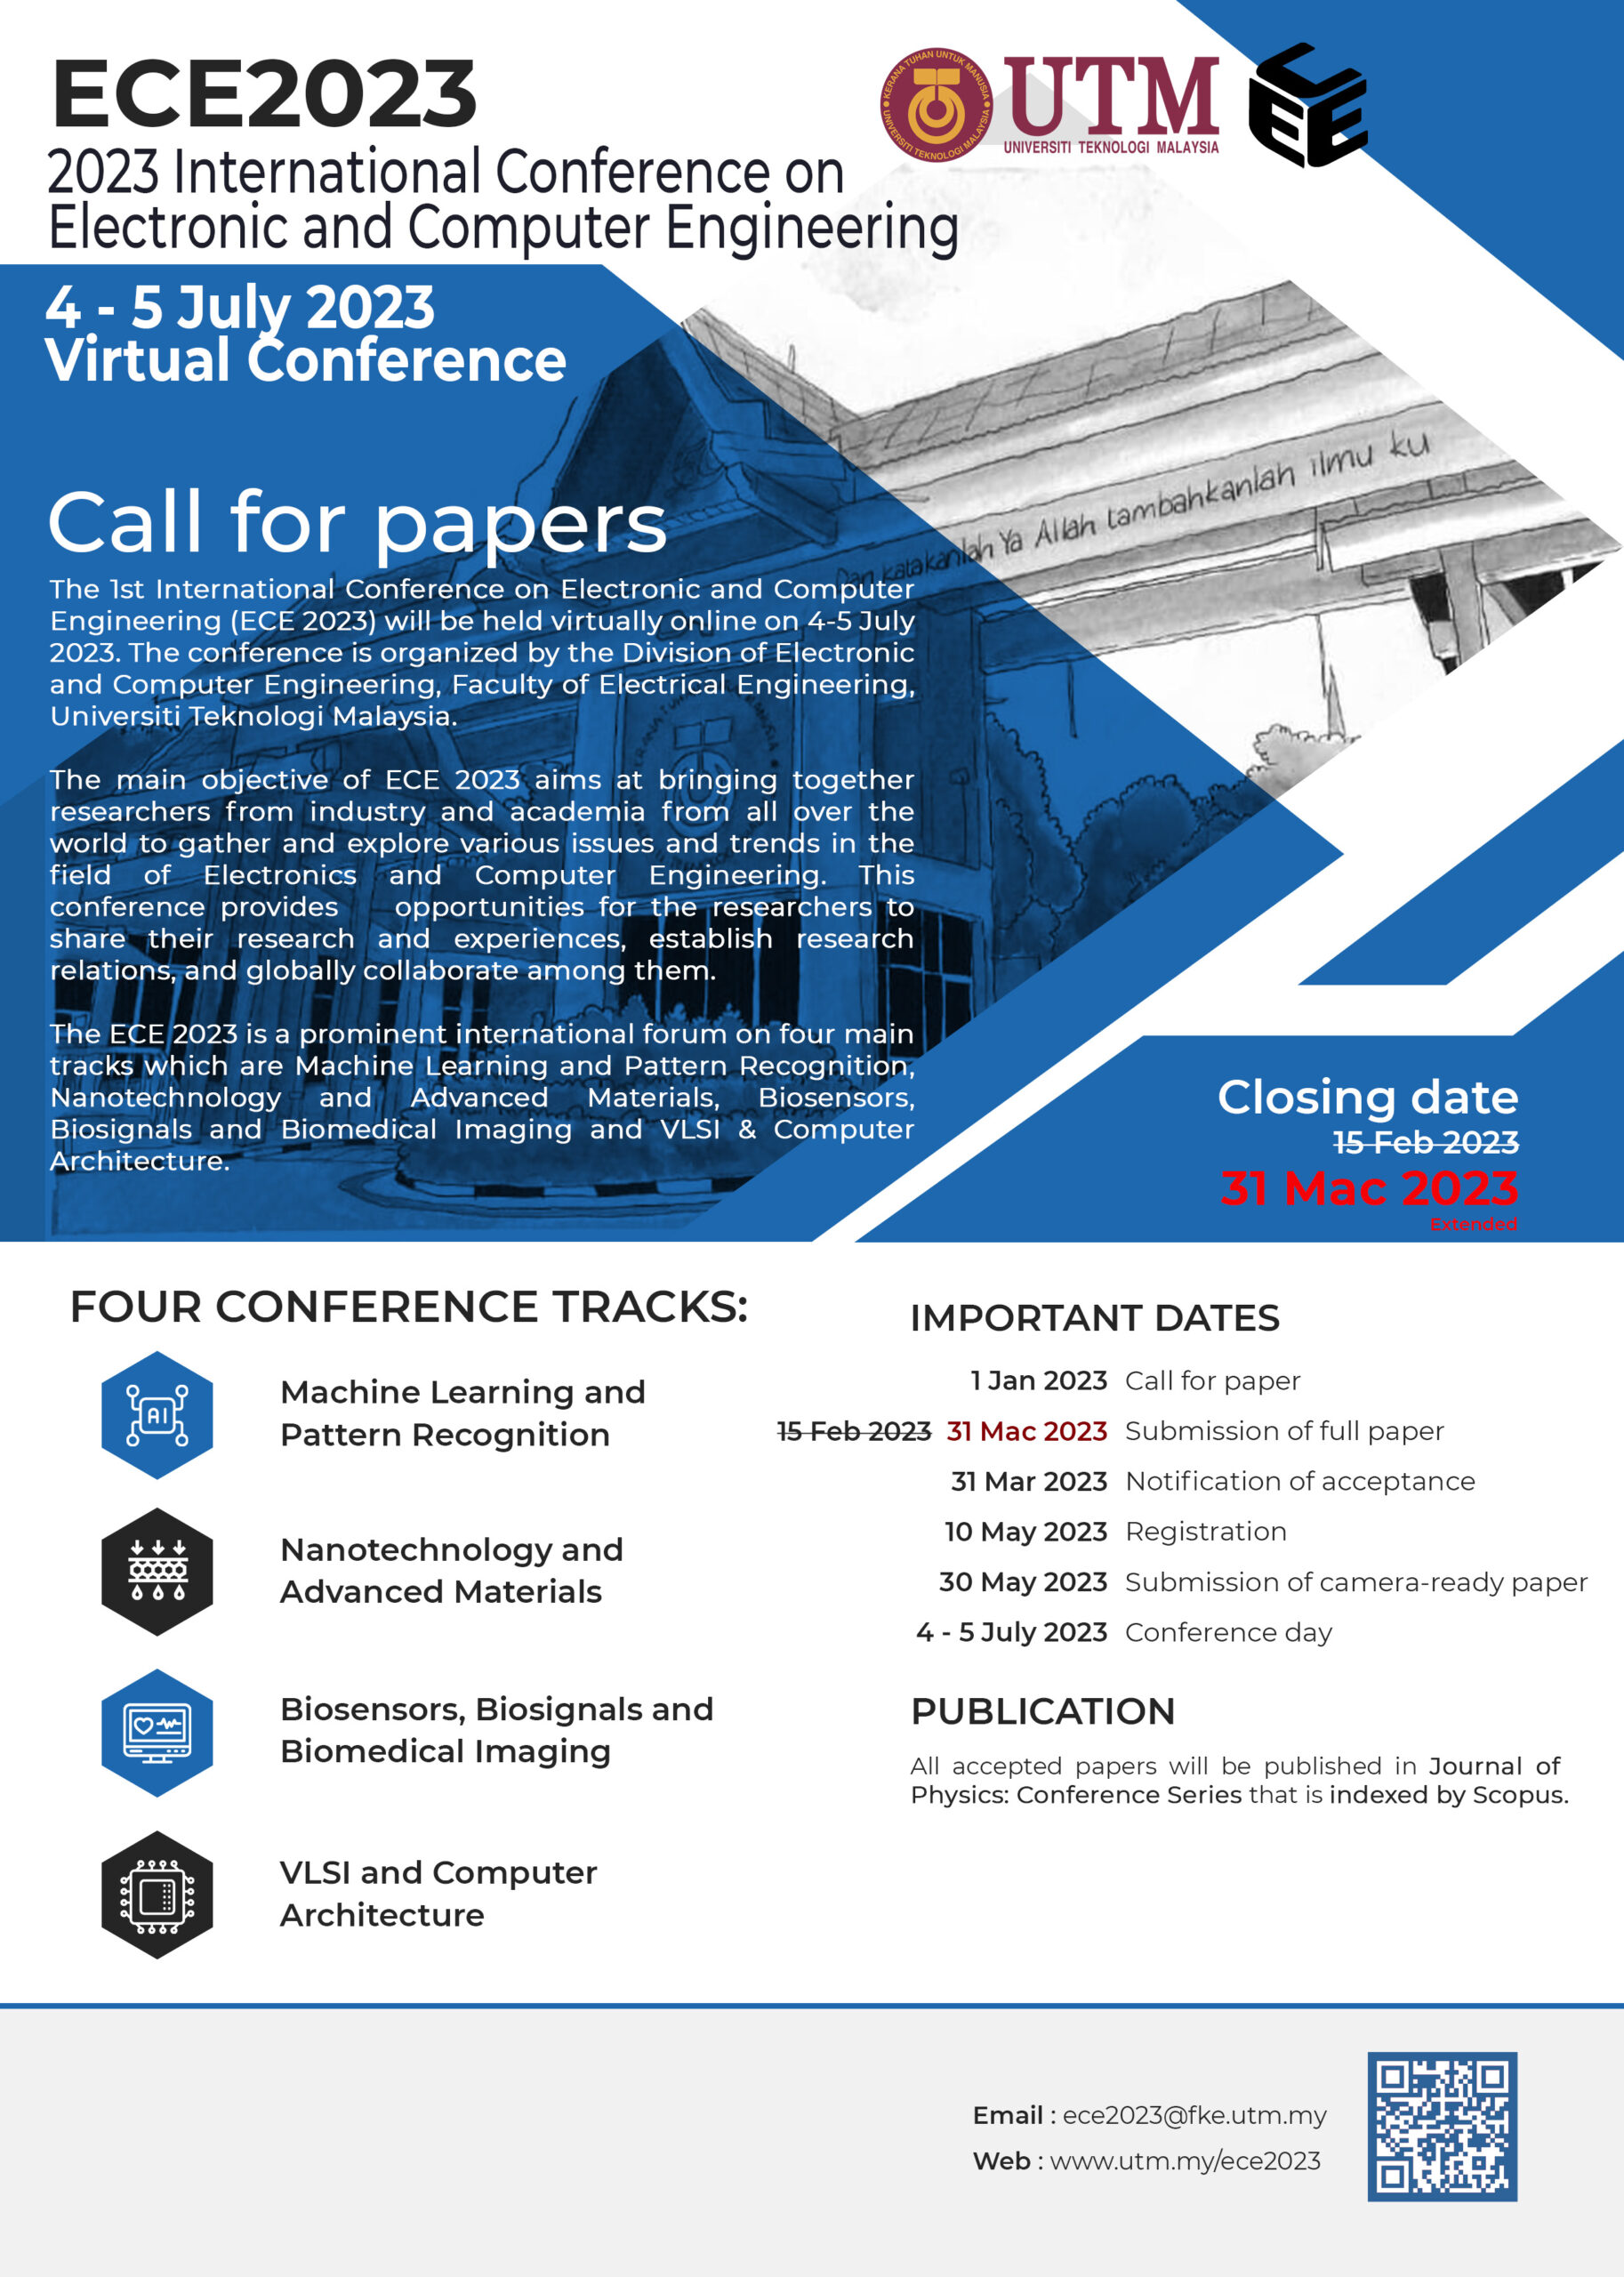 Call for Papers International Conference on Electronic and Computer